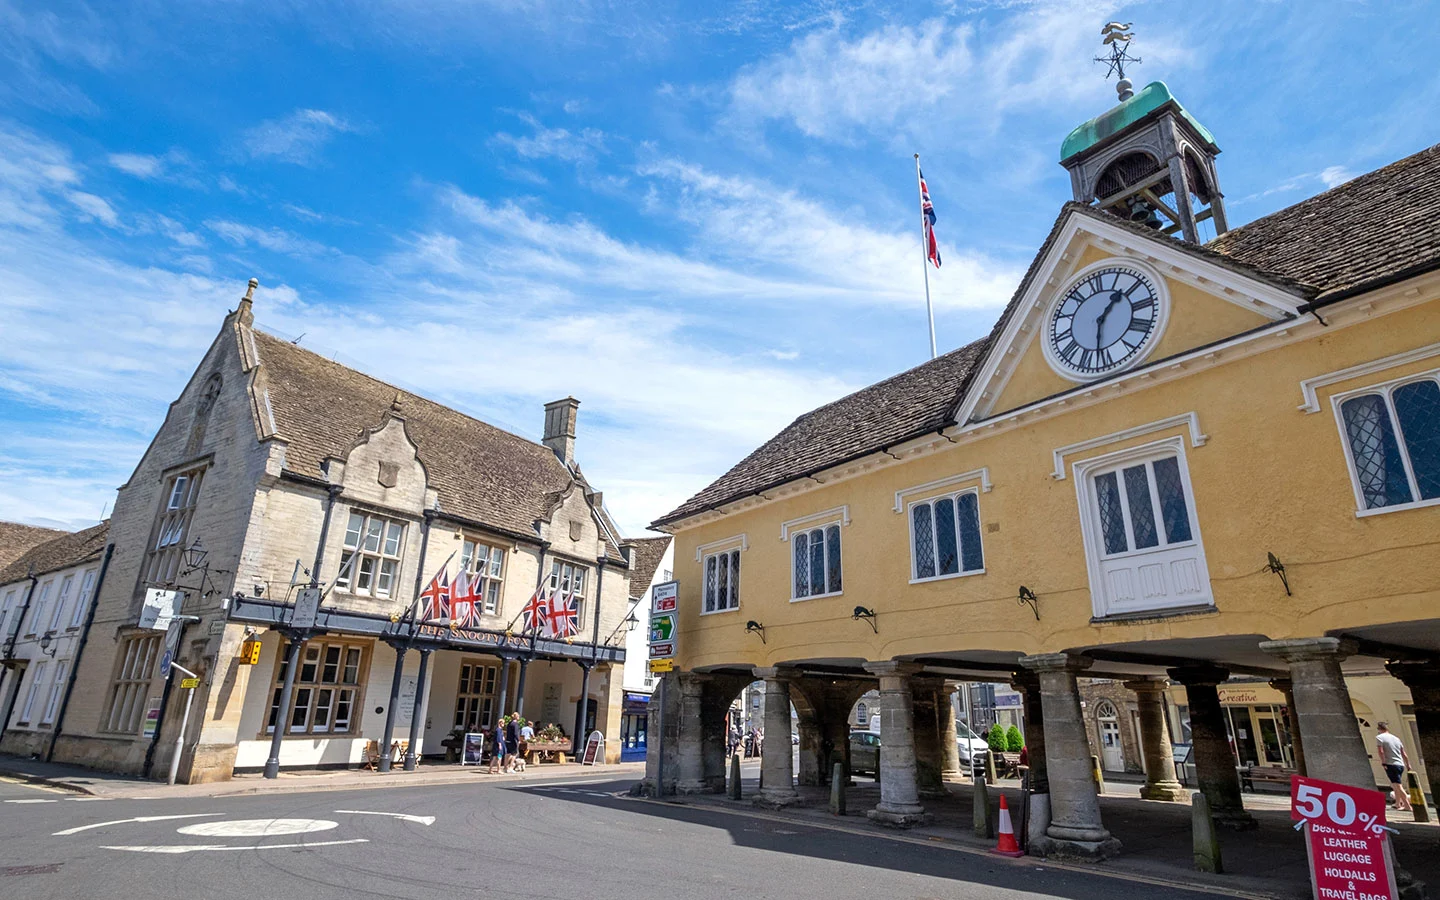 Tetbury Market Hall in the Cotswolds